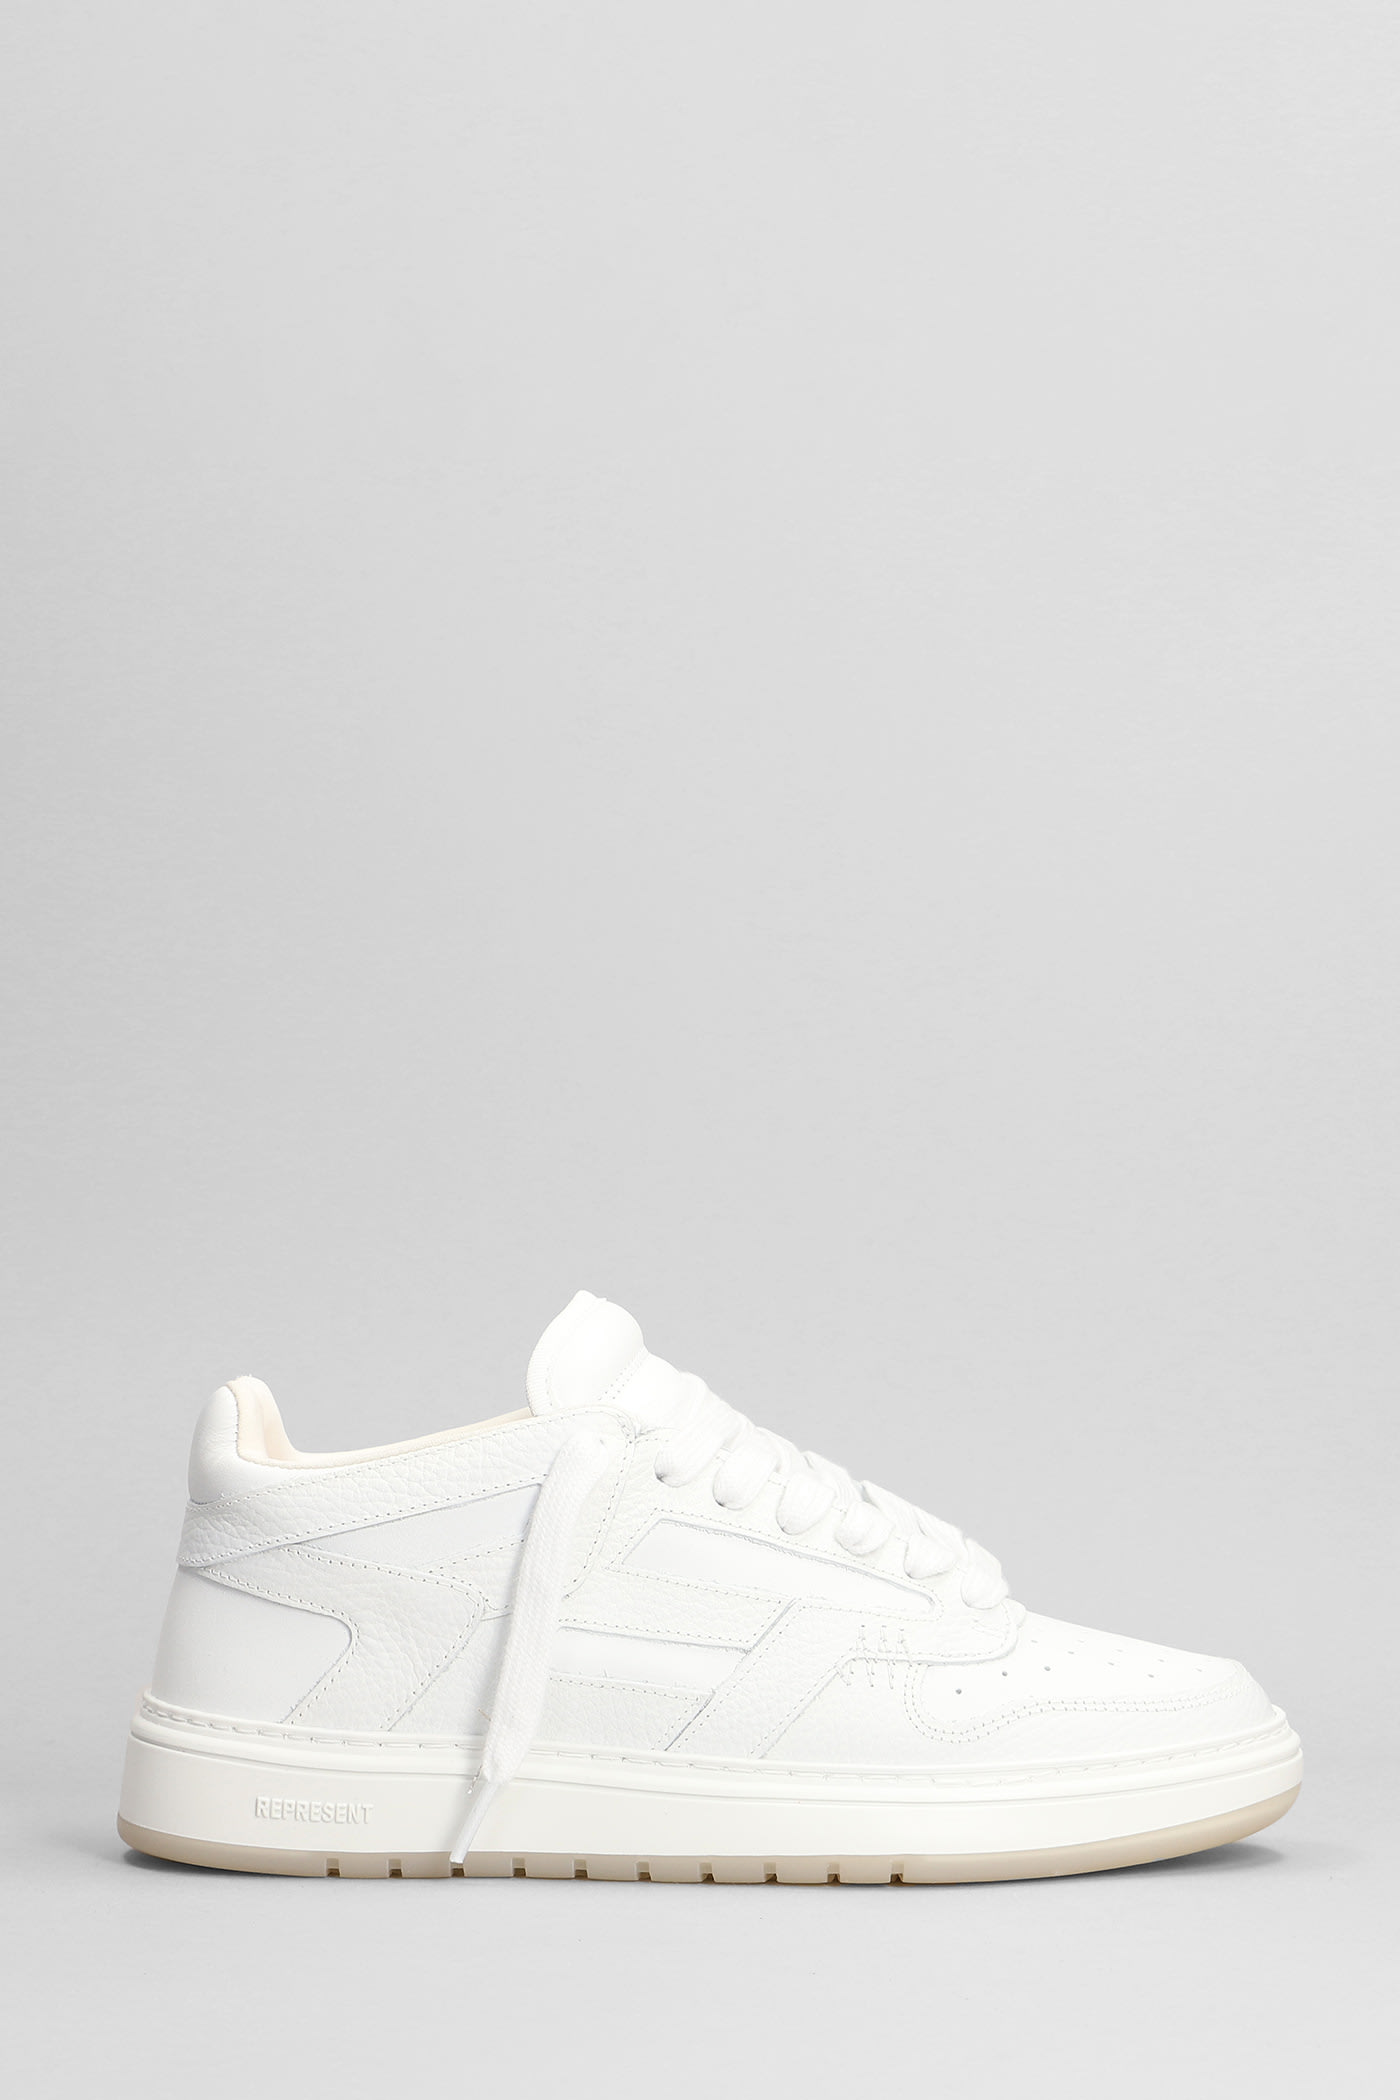 REPRESENT REPTOR LOW trainers IN WHITE LEATHER